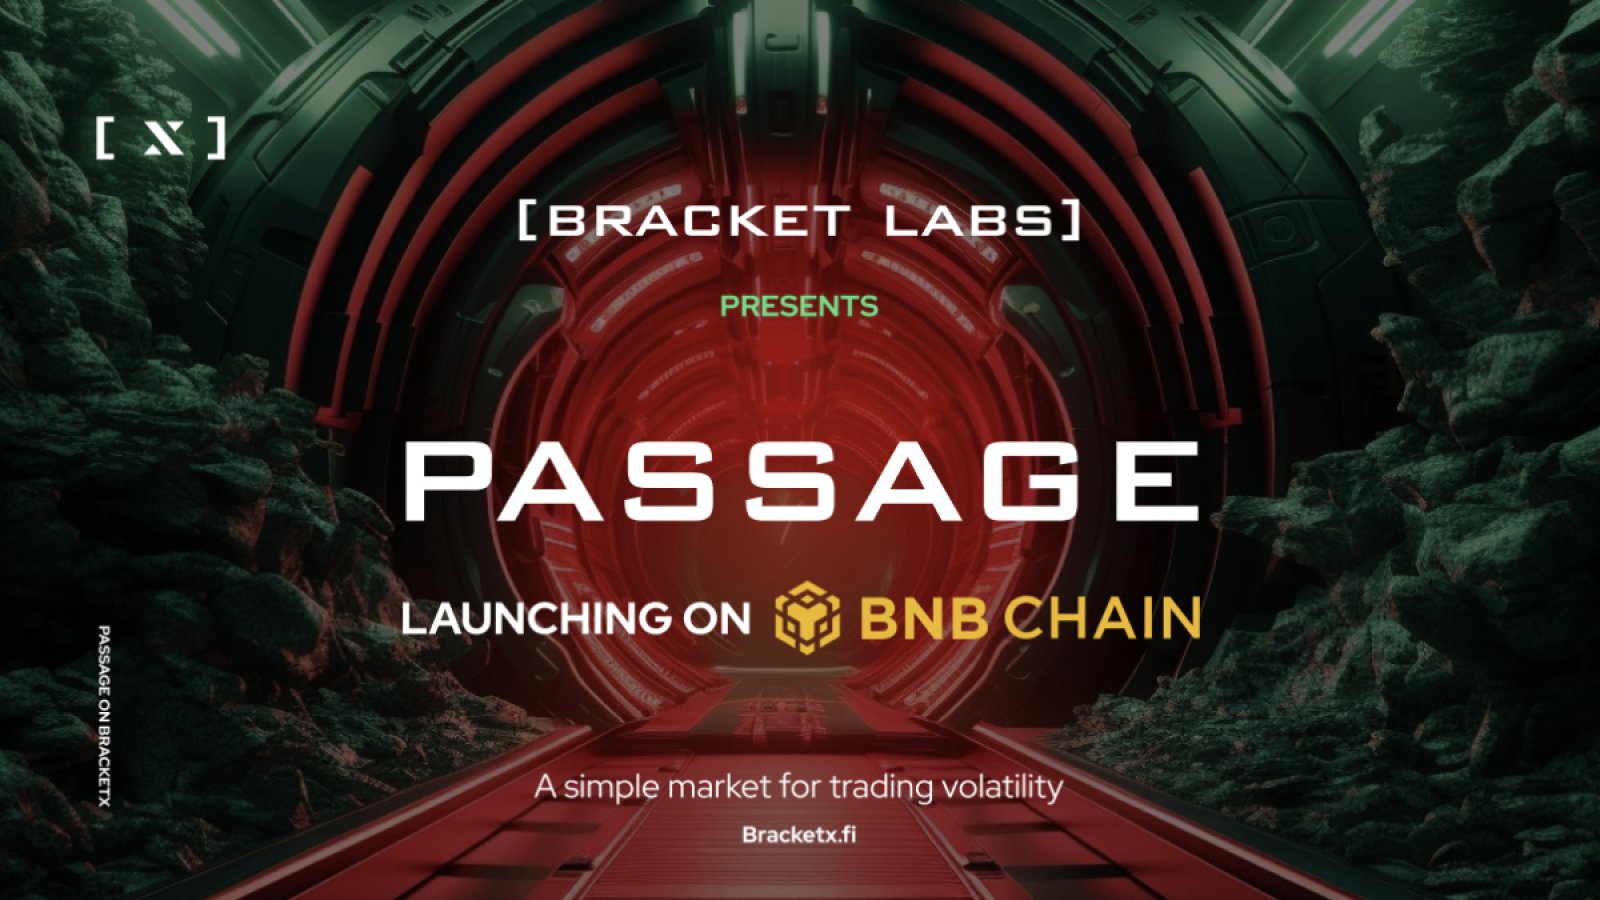 Bracket Labs Expands Cross-Chain to Deliver Volatility Trading Product, Passage, to BNB Chain’s 1+ Million Users